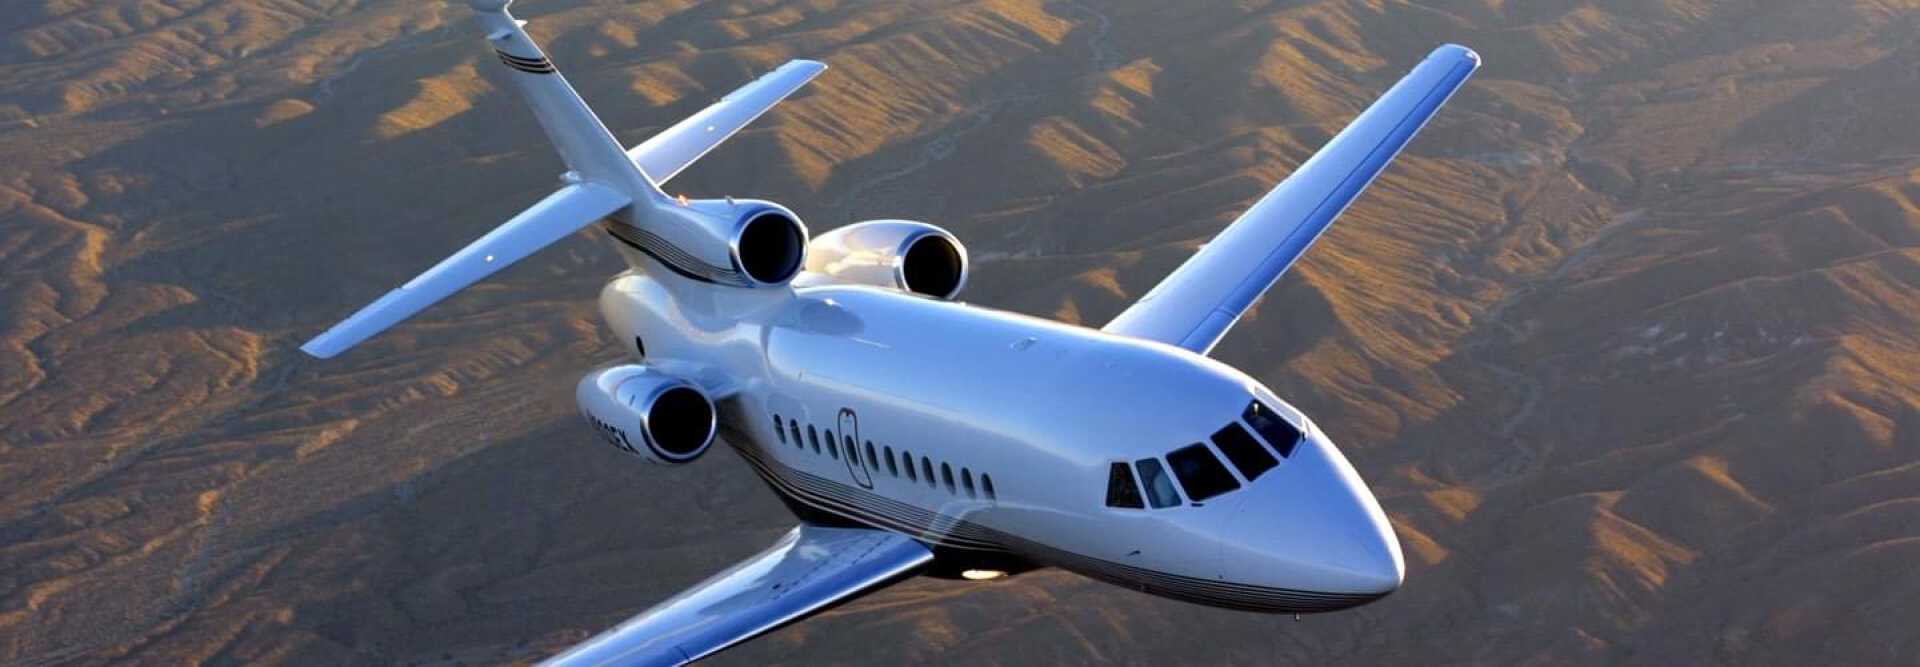 Super Large Business Jet Dassault Falcon 900B to charter for private aviation flights with LunaJets, French manufacturer, intercontinental